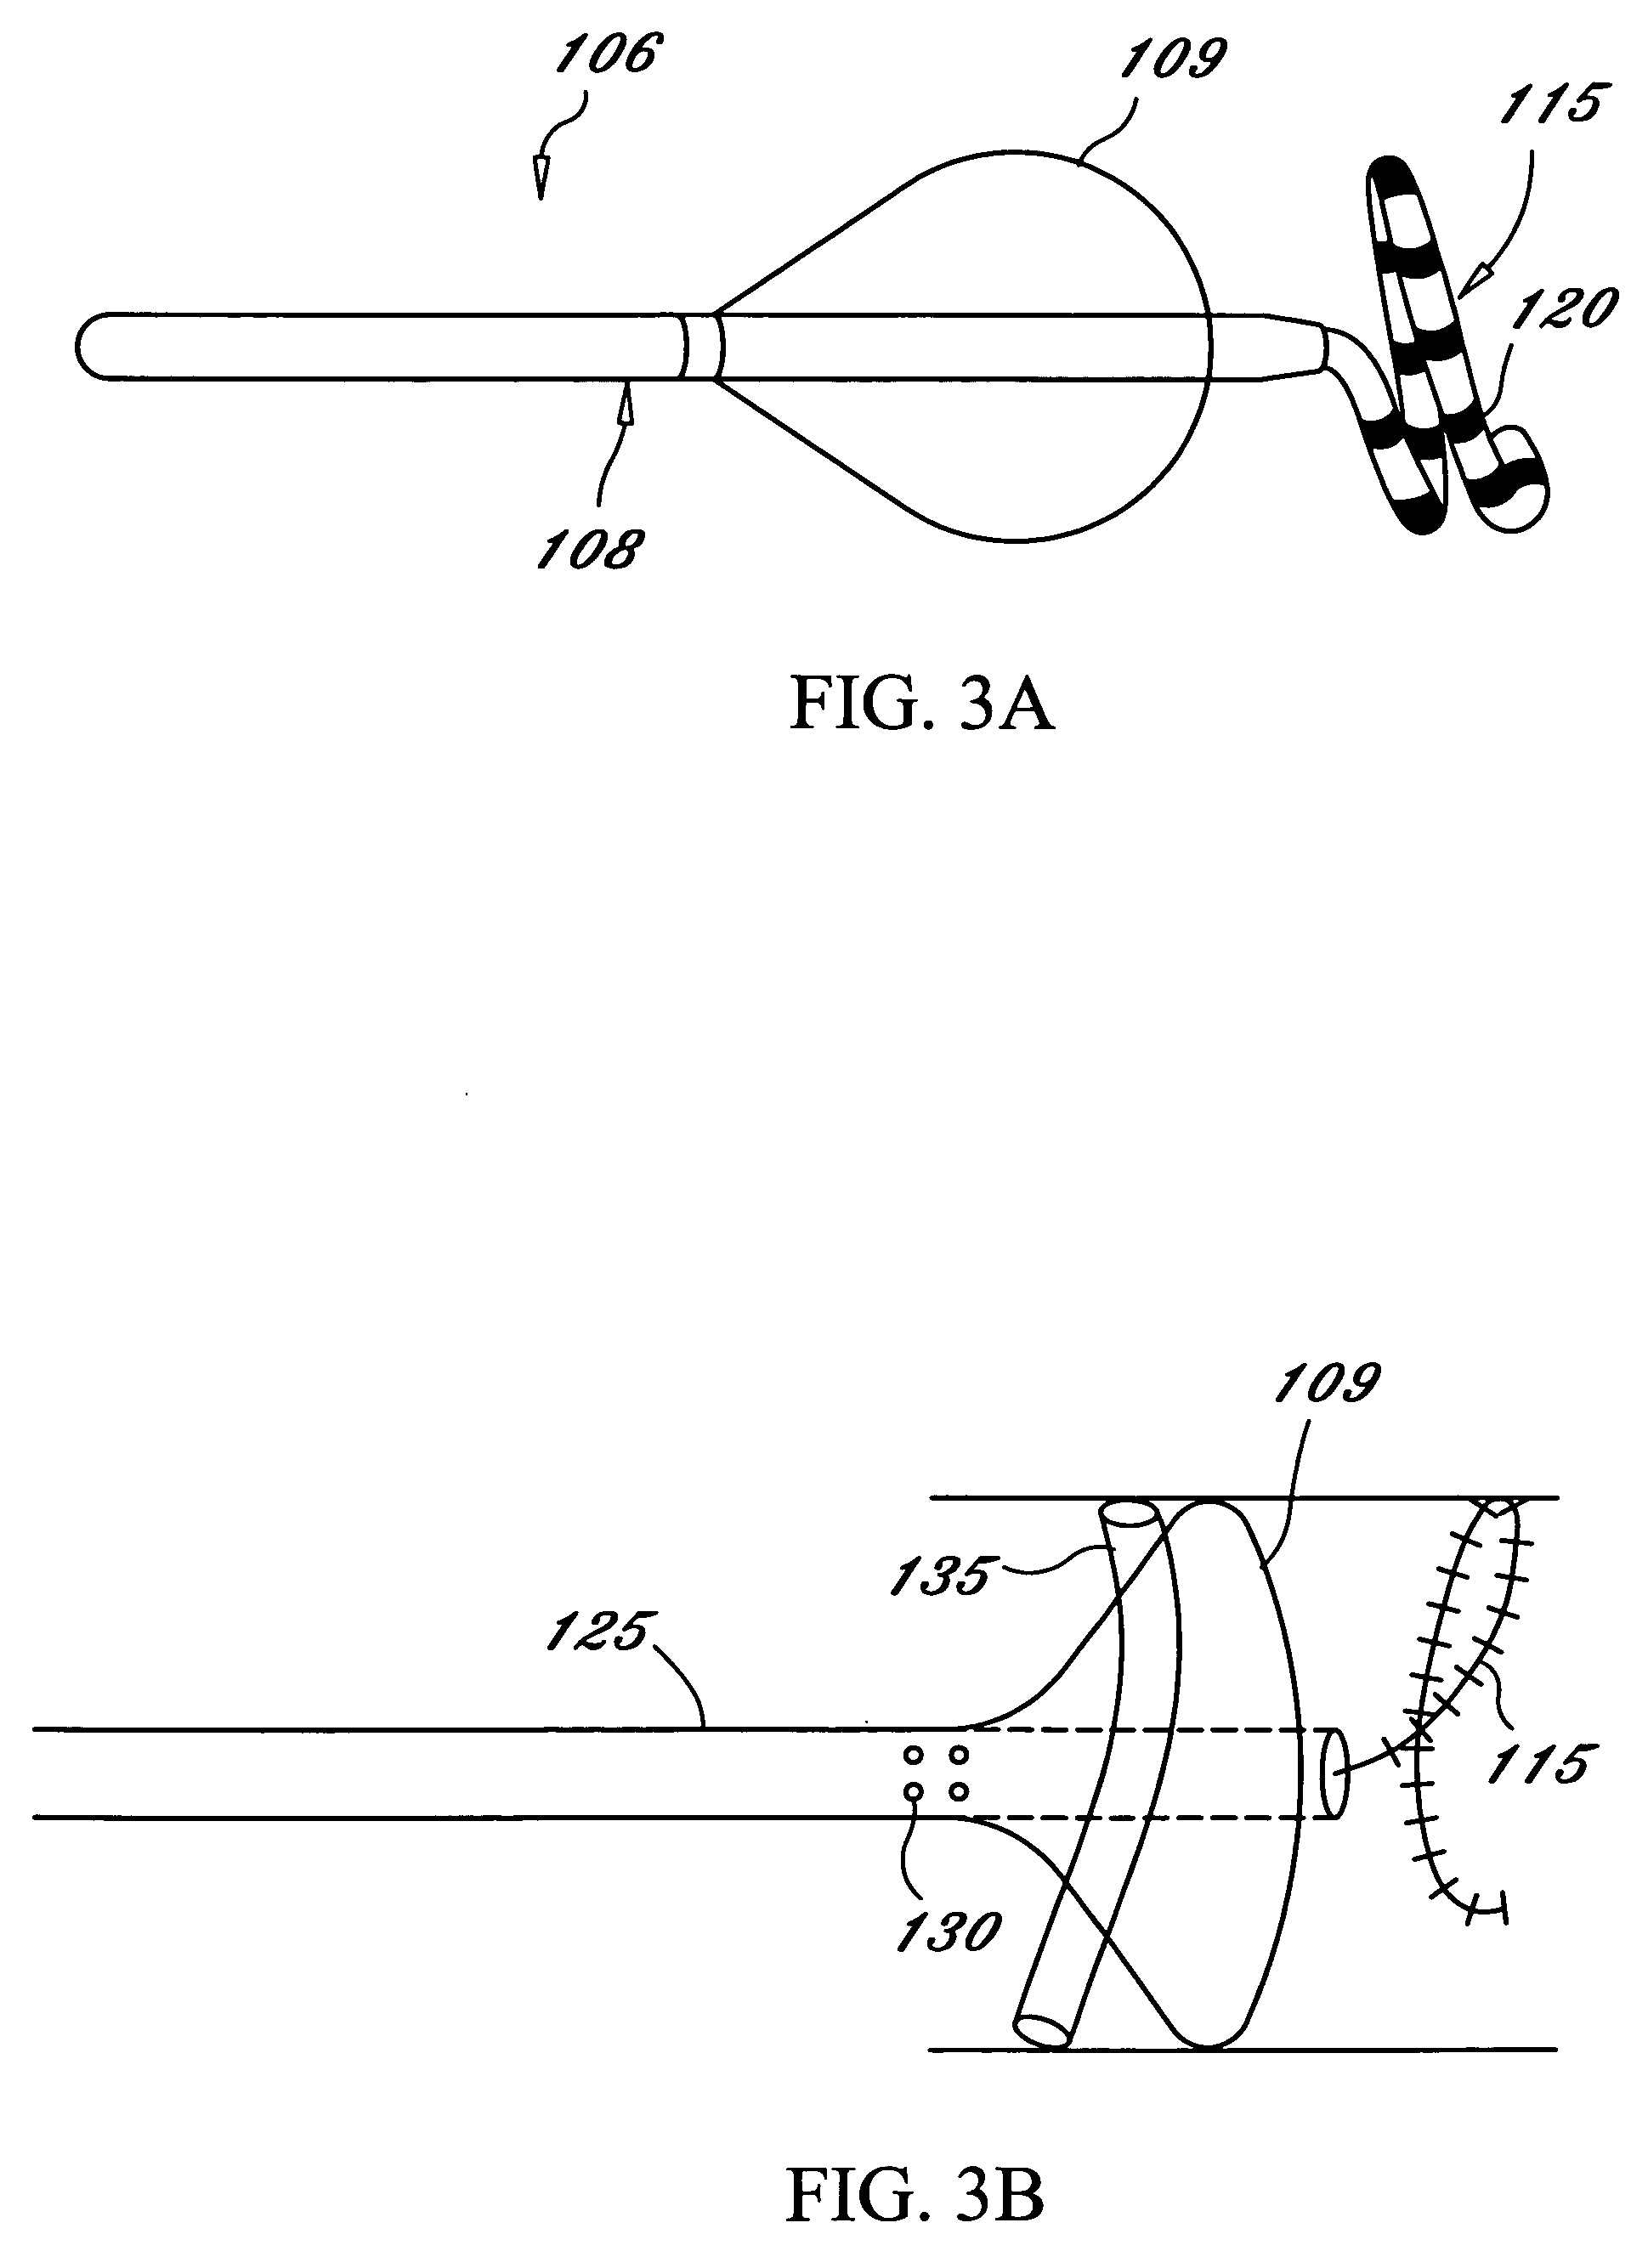 Tissue ablation system including guidewire with sensing element